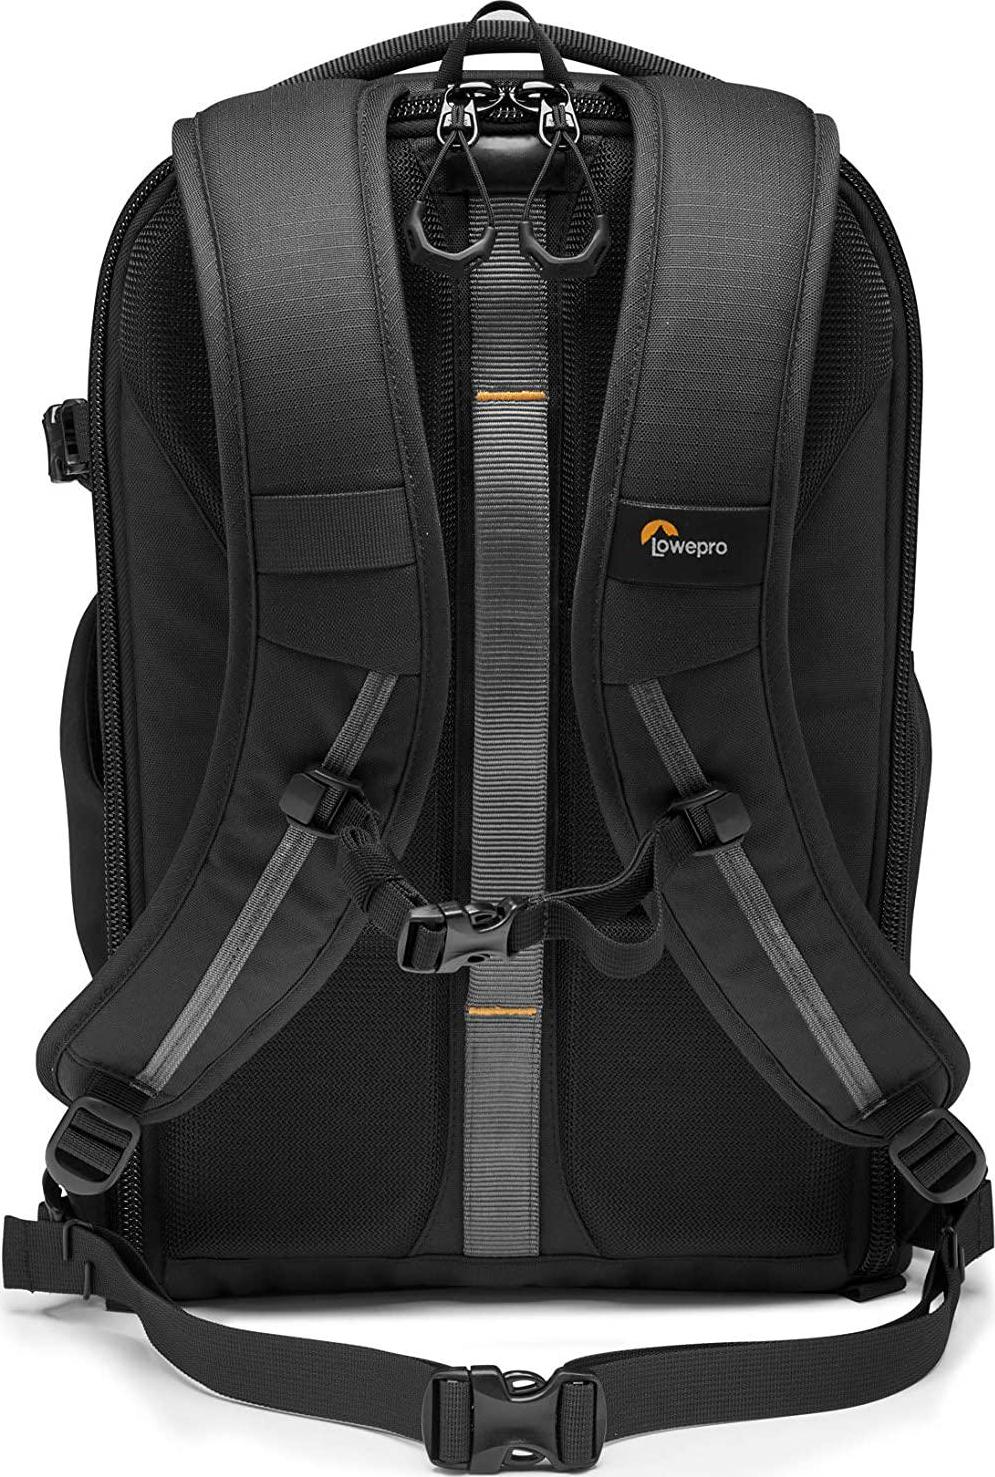 Lowepro, Lowepro Flipside BP 300 AW III Mirrorless and DSLR Camera Backpack - Black - with Rear Access - with Side Access - with Adjustable Dividers - for Mirrorless Cameras